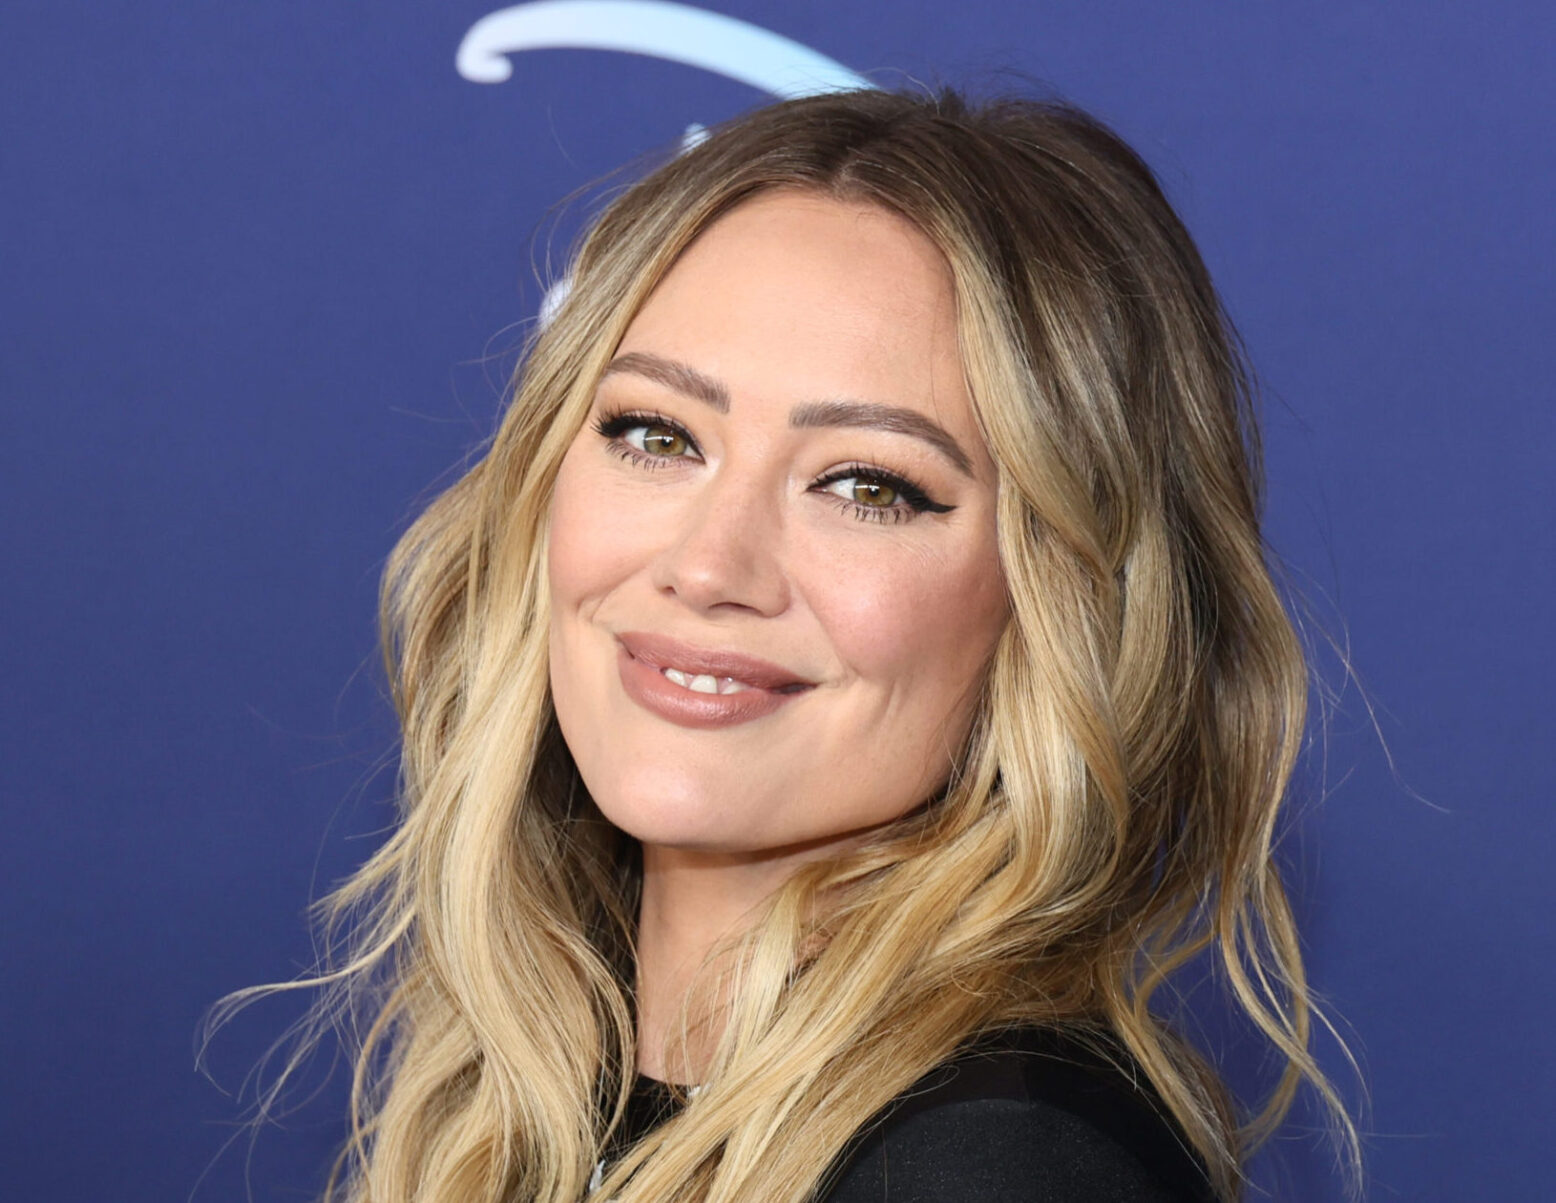 Hilary Duff Reveals Her Main Concern Over Nude Photoshoot The Content Factory 4560